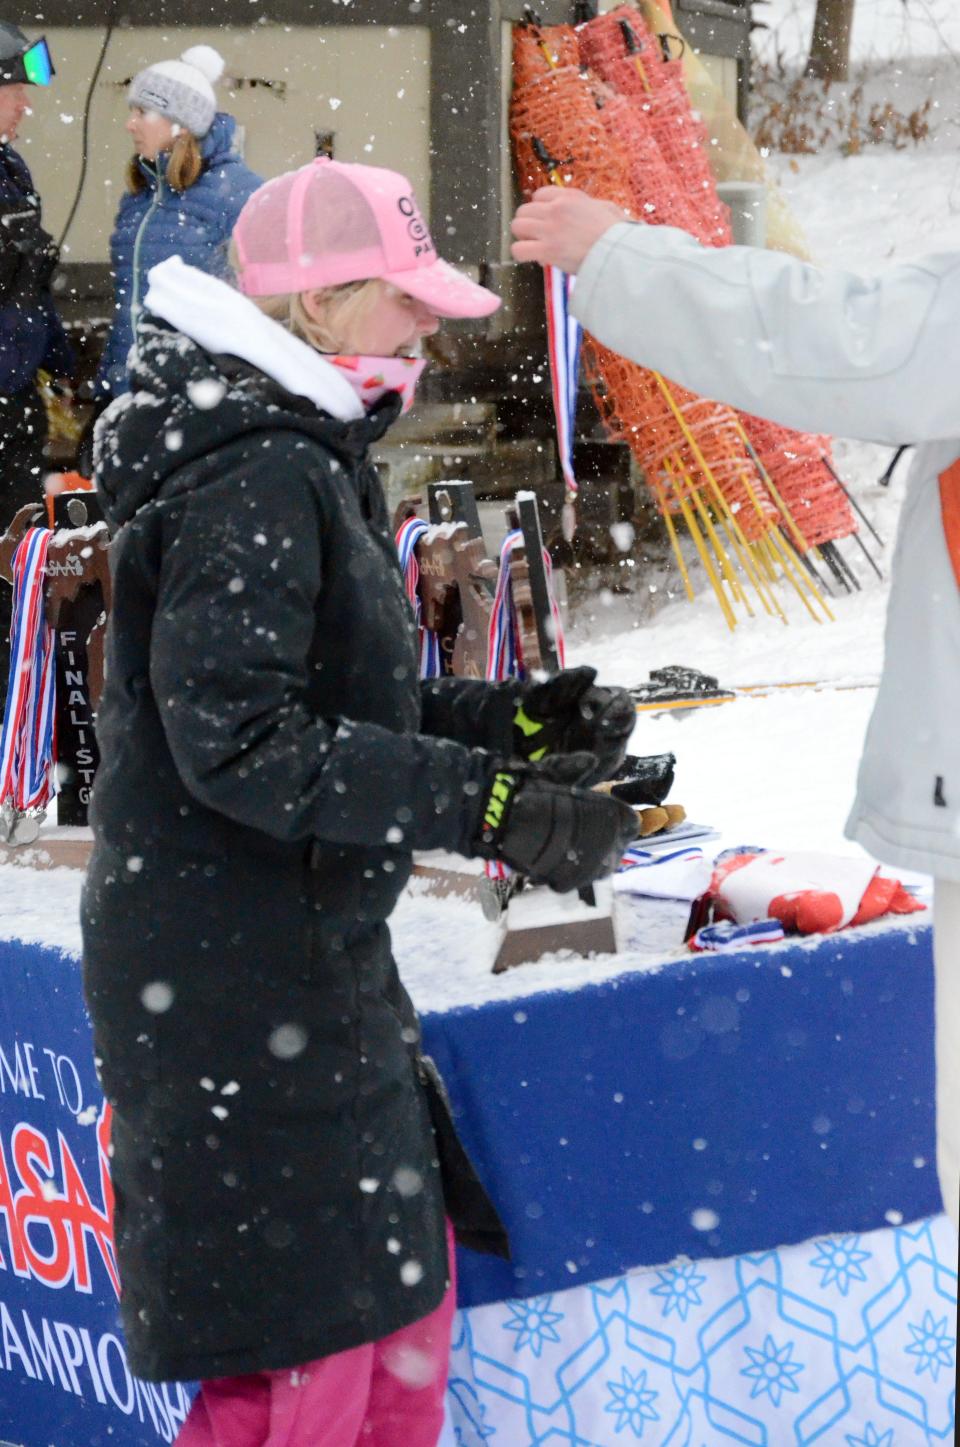 Kaija Lazda receives her medal at the D2 state finals at Boyne Mountain in Boyne Falls, Mich. on Monday, Feb. 27